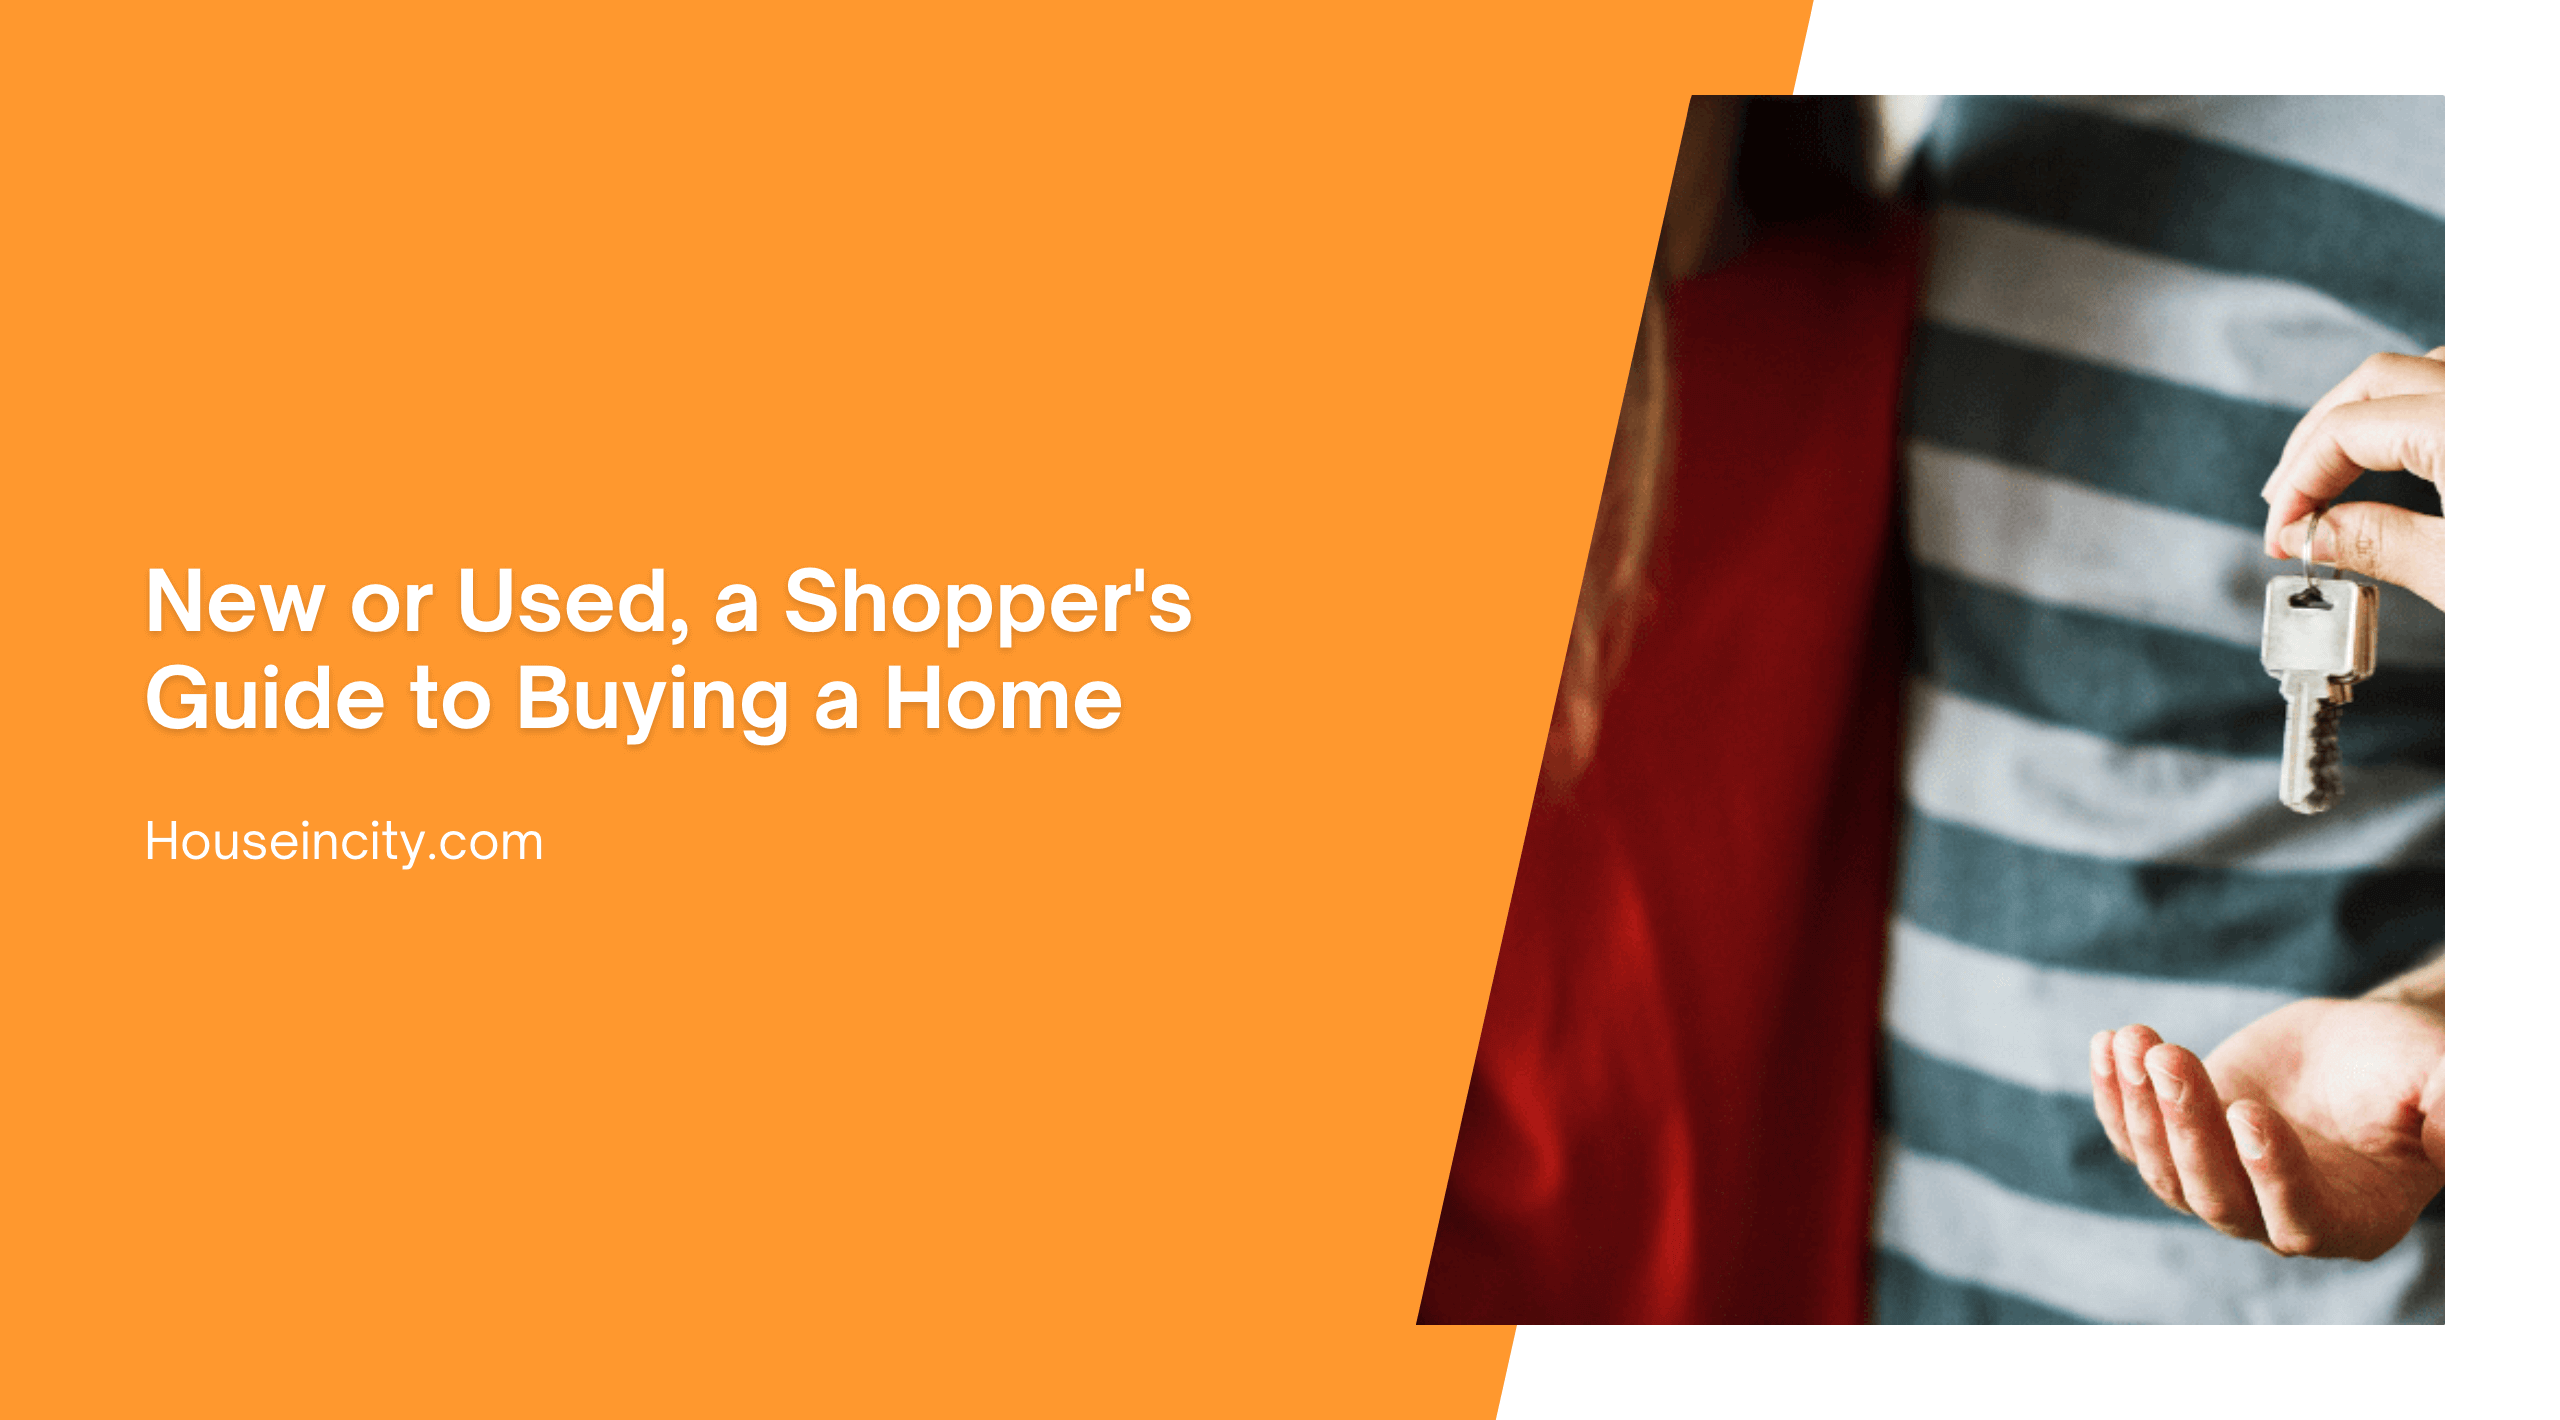 New or Used, a Shopper's Guide to Buying a Home